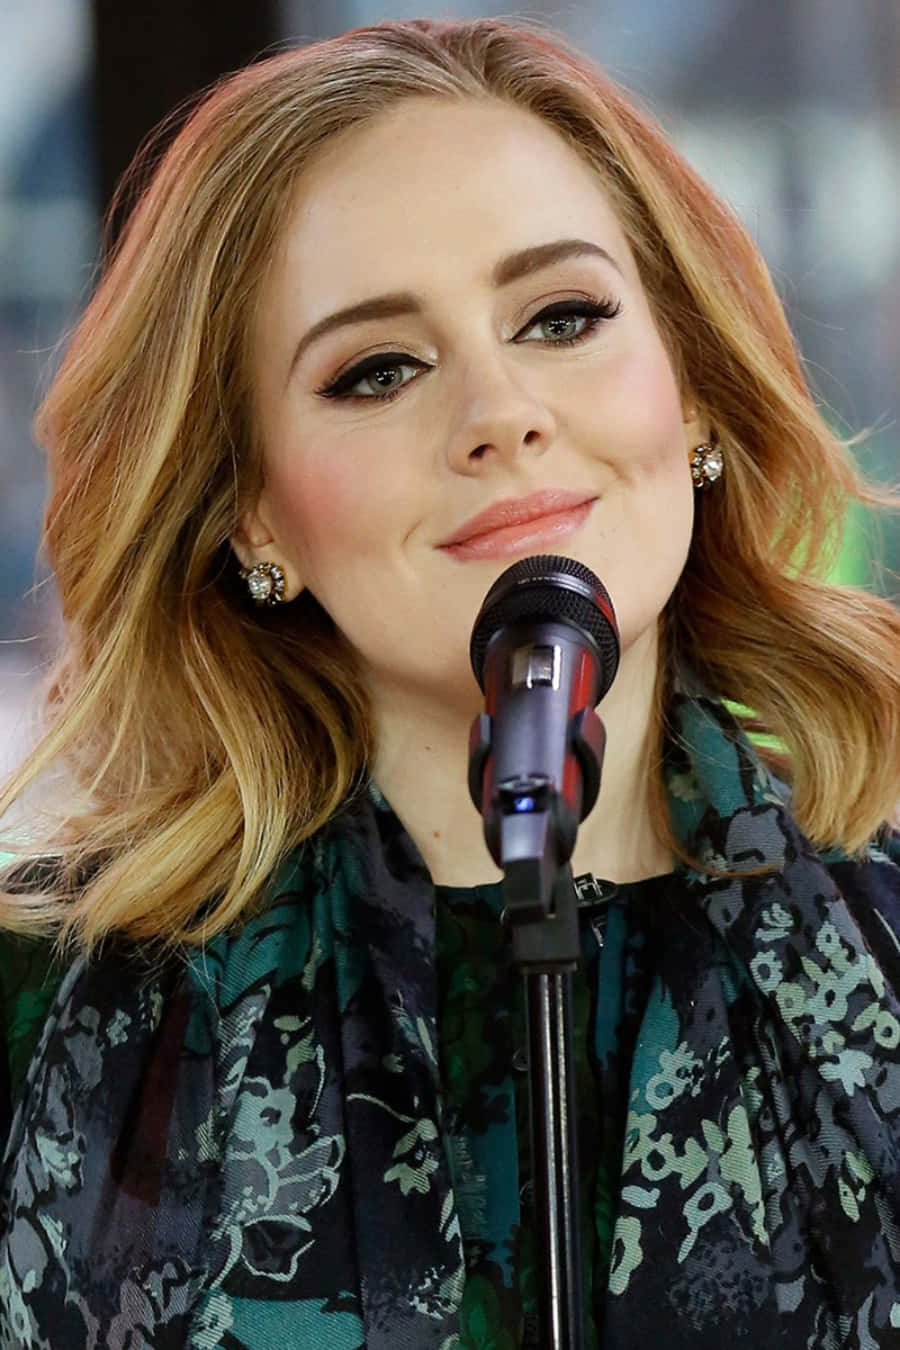 Adele performing live at Madison Square Garden